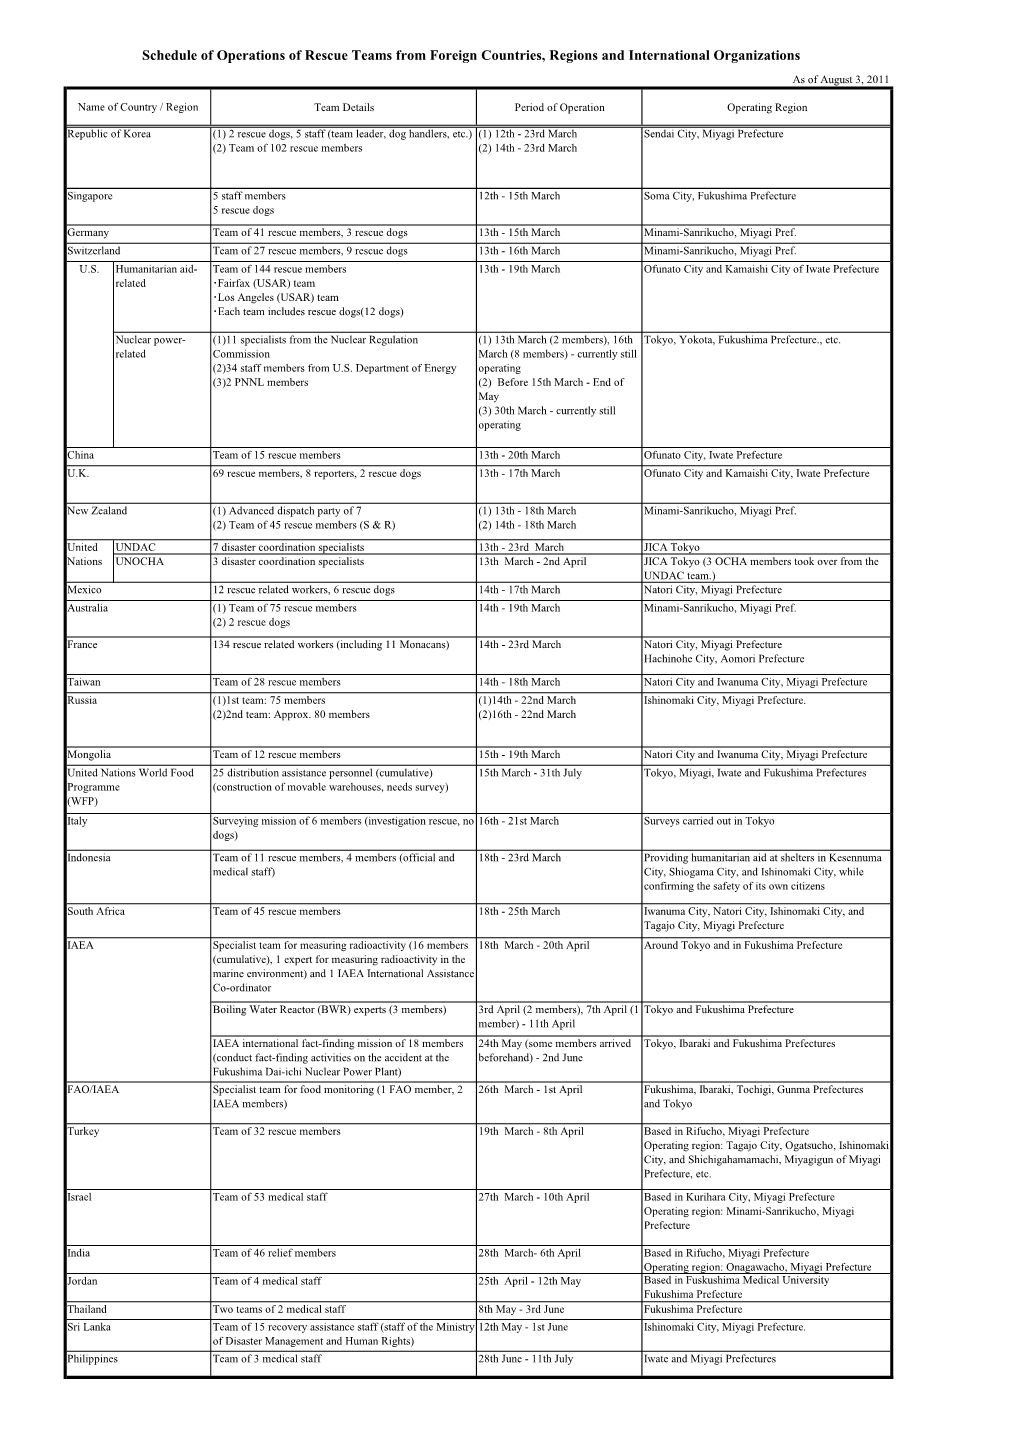 Schedule of Operations of Rescue Teams from Foreign Countries, Regions and International Organizations As of August 3, 2011